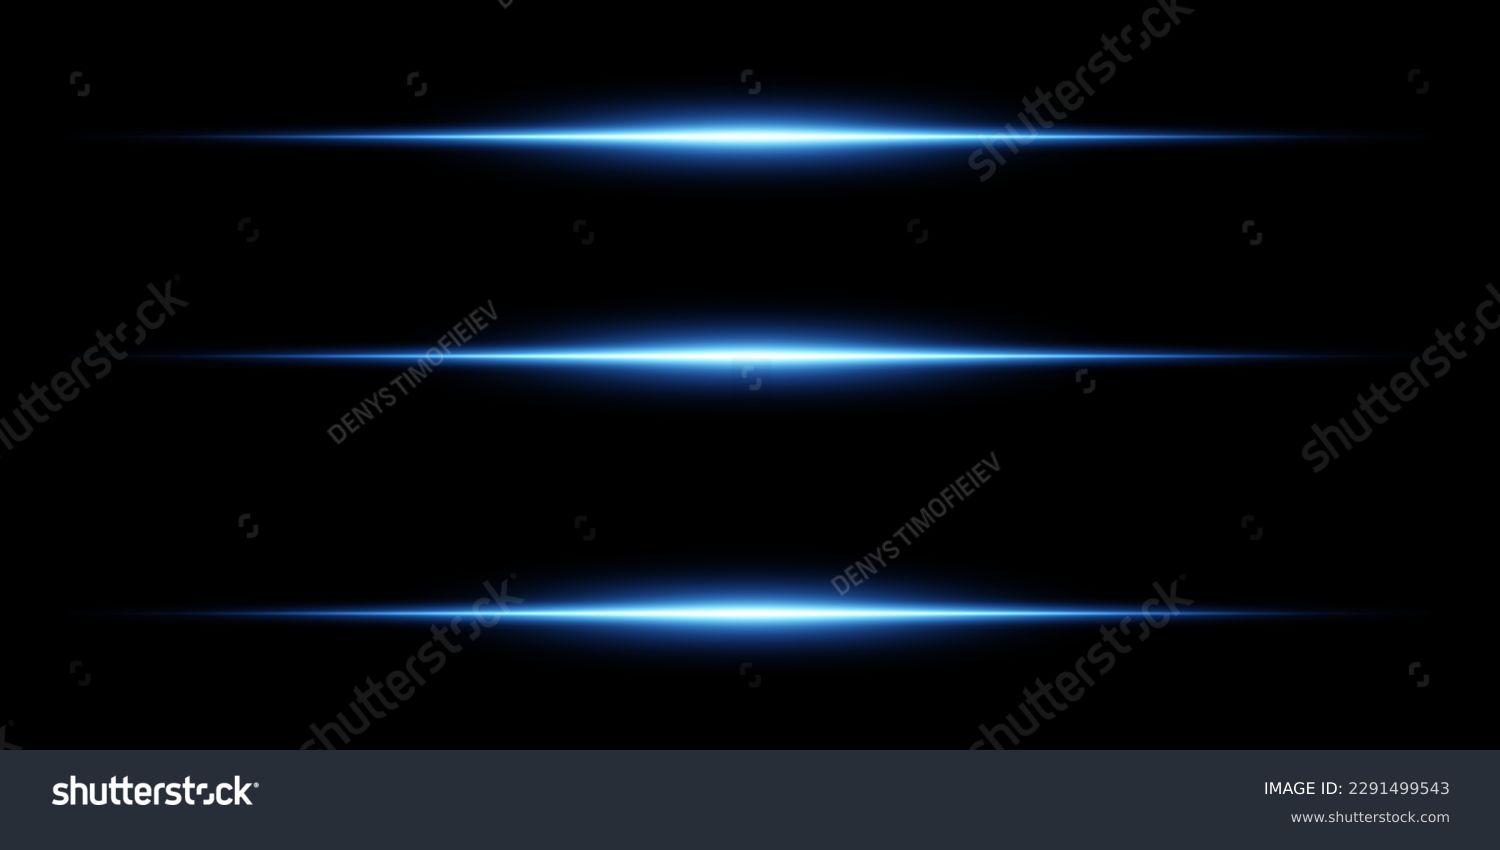 Blue neon stripes or light flash. Laser beams, horizontal beams. Beautiful light reflections. Glowing stripes on a black background. #2291499543